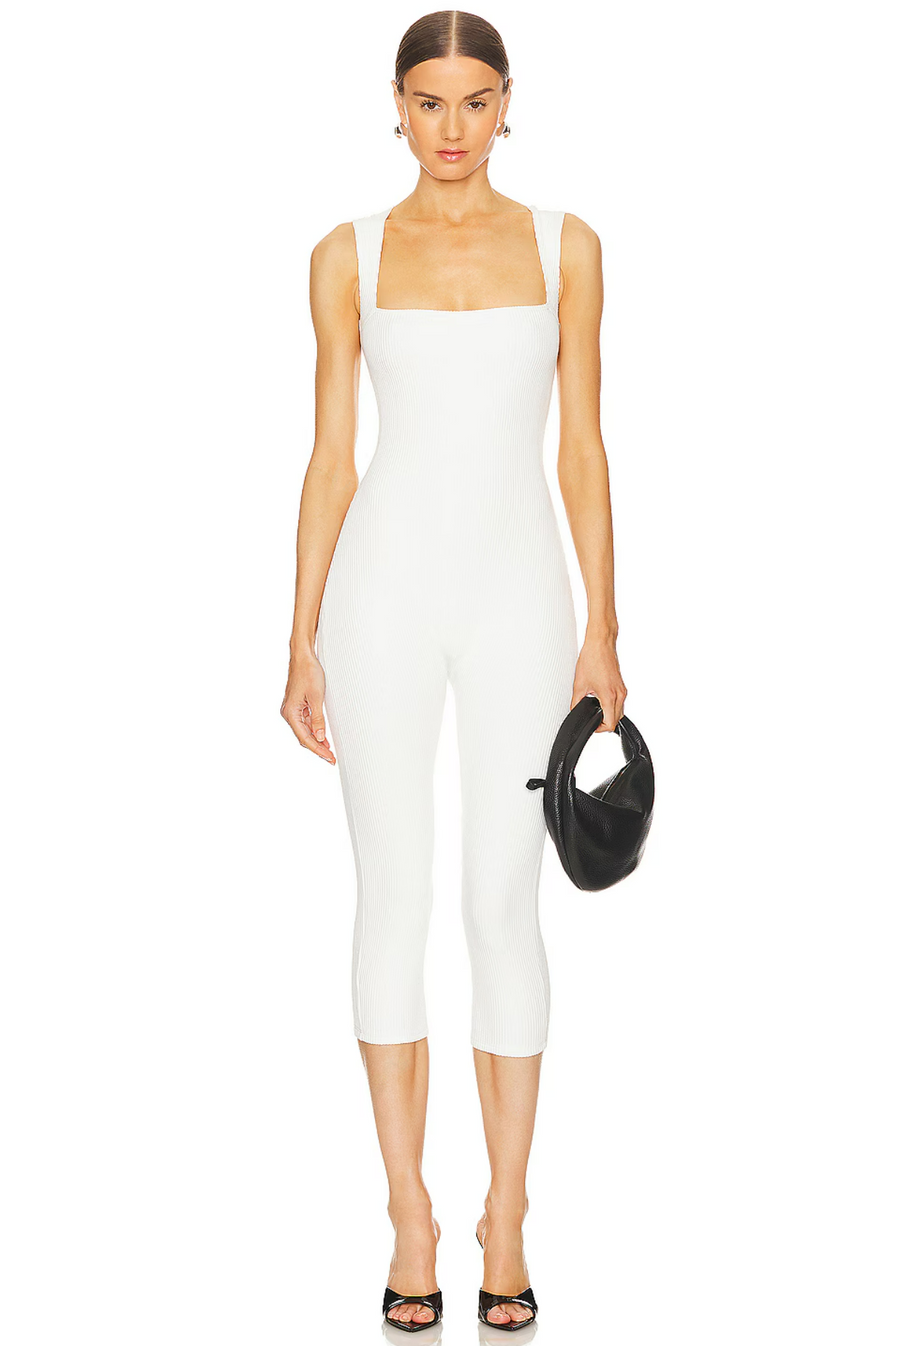 Bell Pedal Pusher Jumpsuit